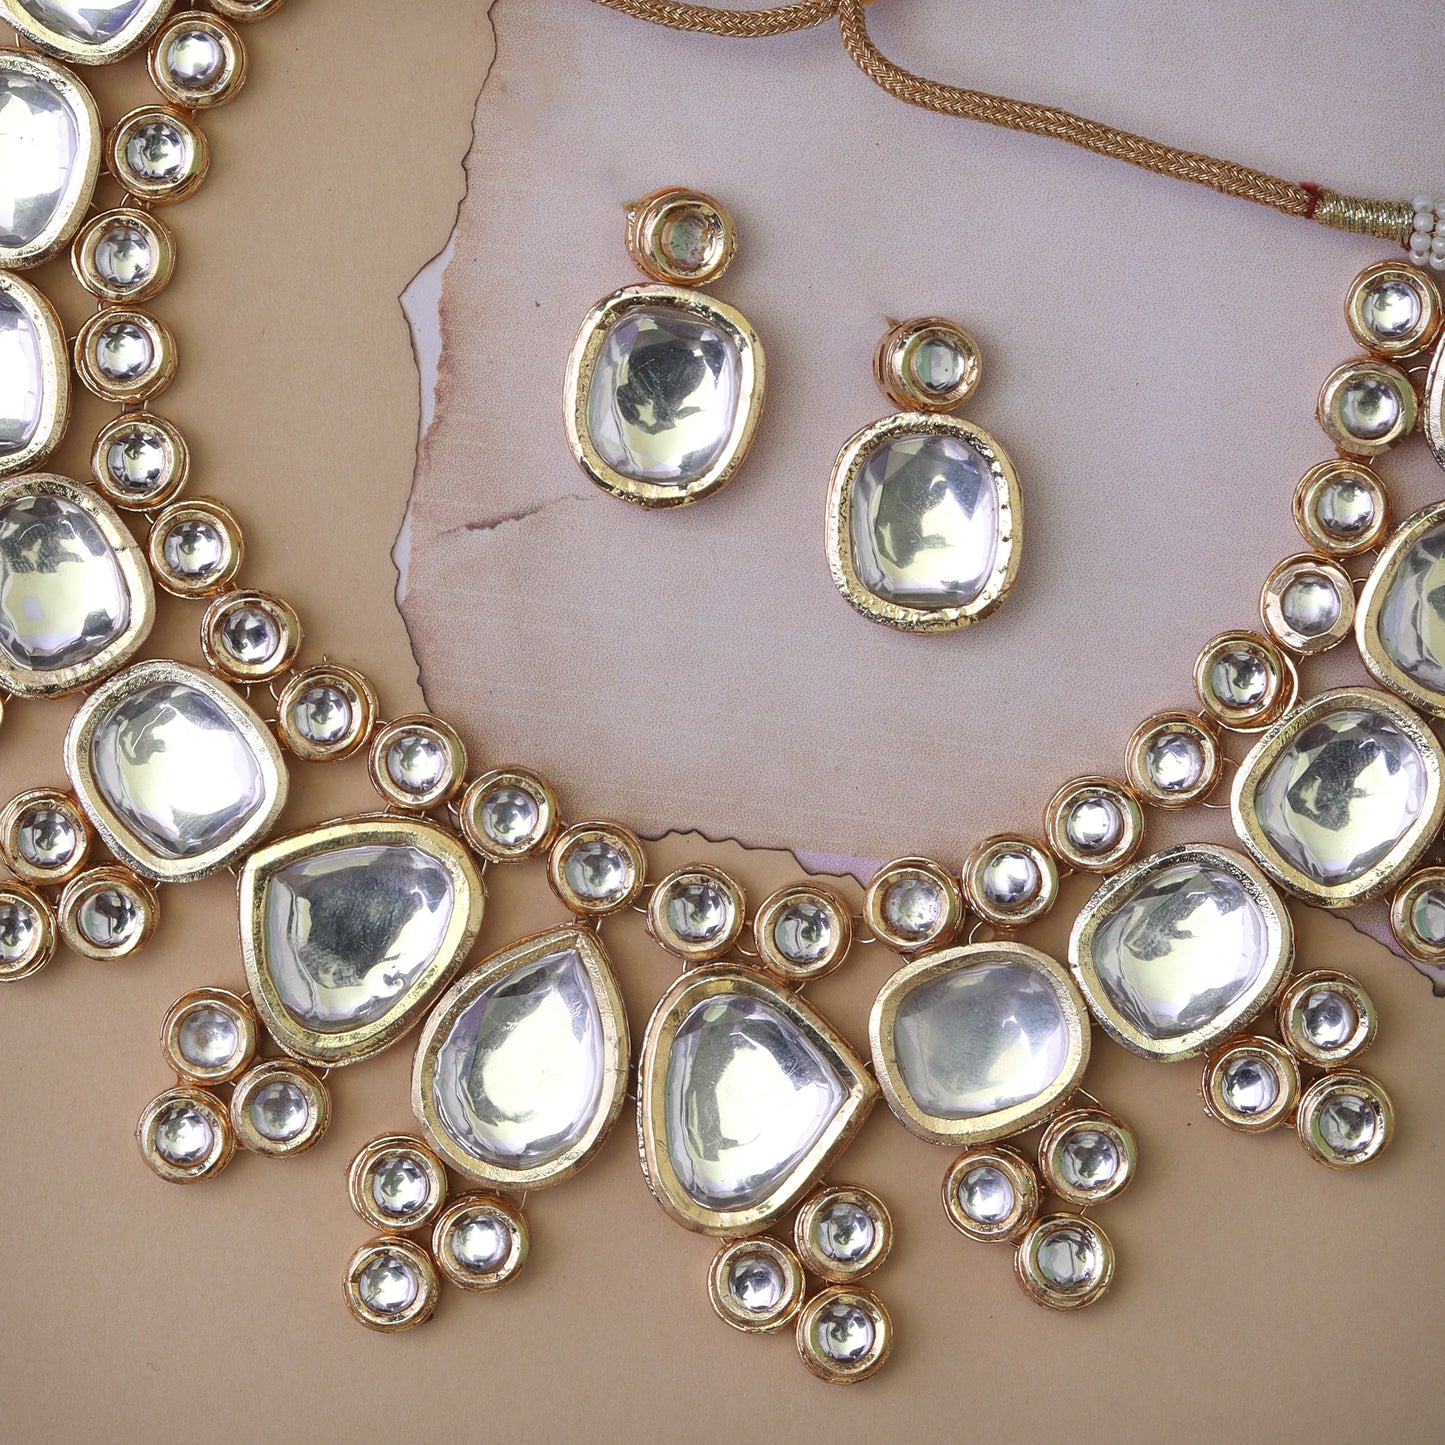 Kaisha Necklace set with Earrings in Off white